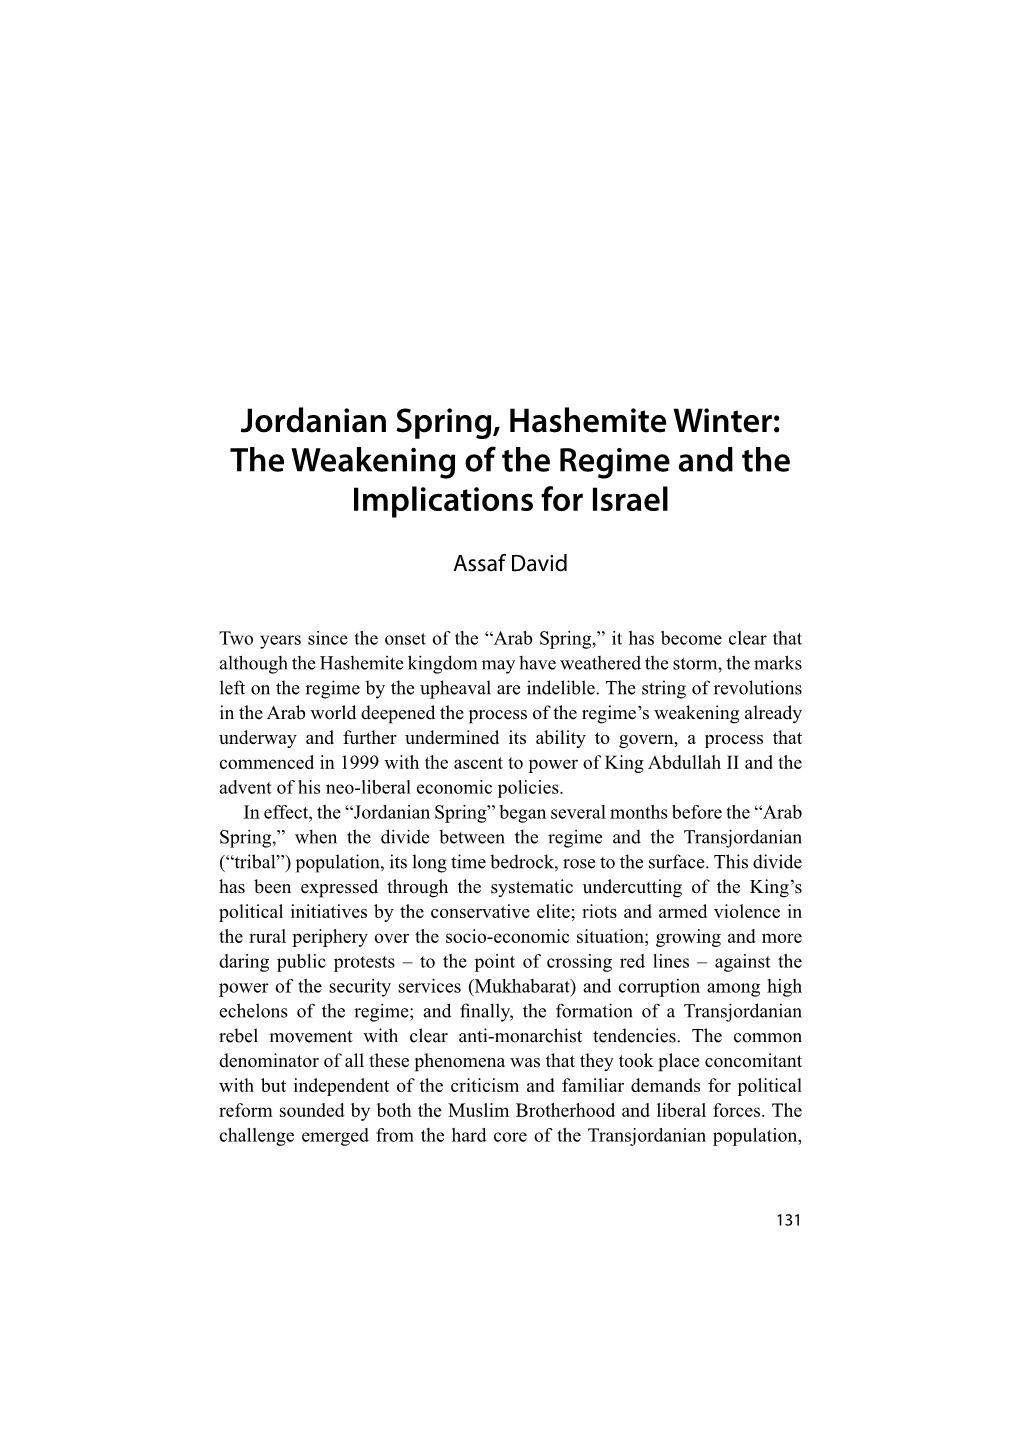 Jordanian Spring, Hashemite Winter: the Weakening of the Regime and the Implications for Israel